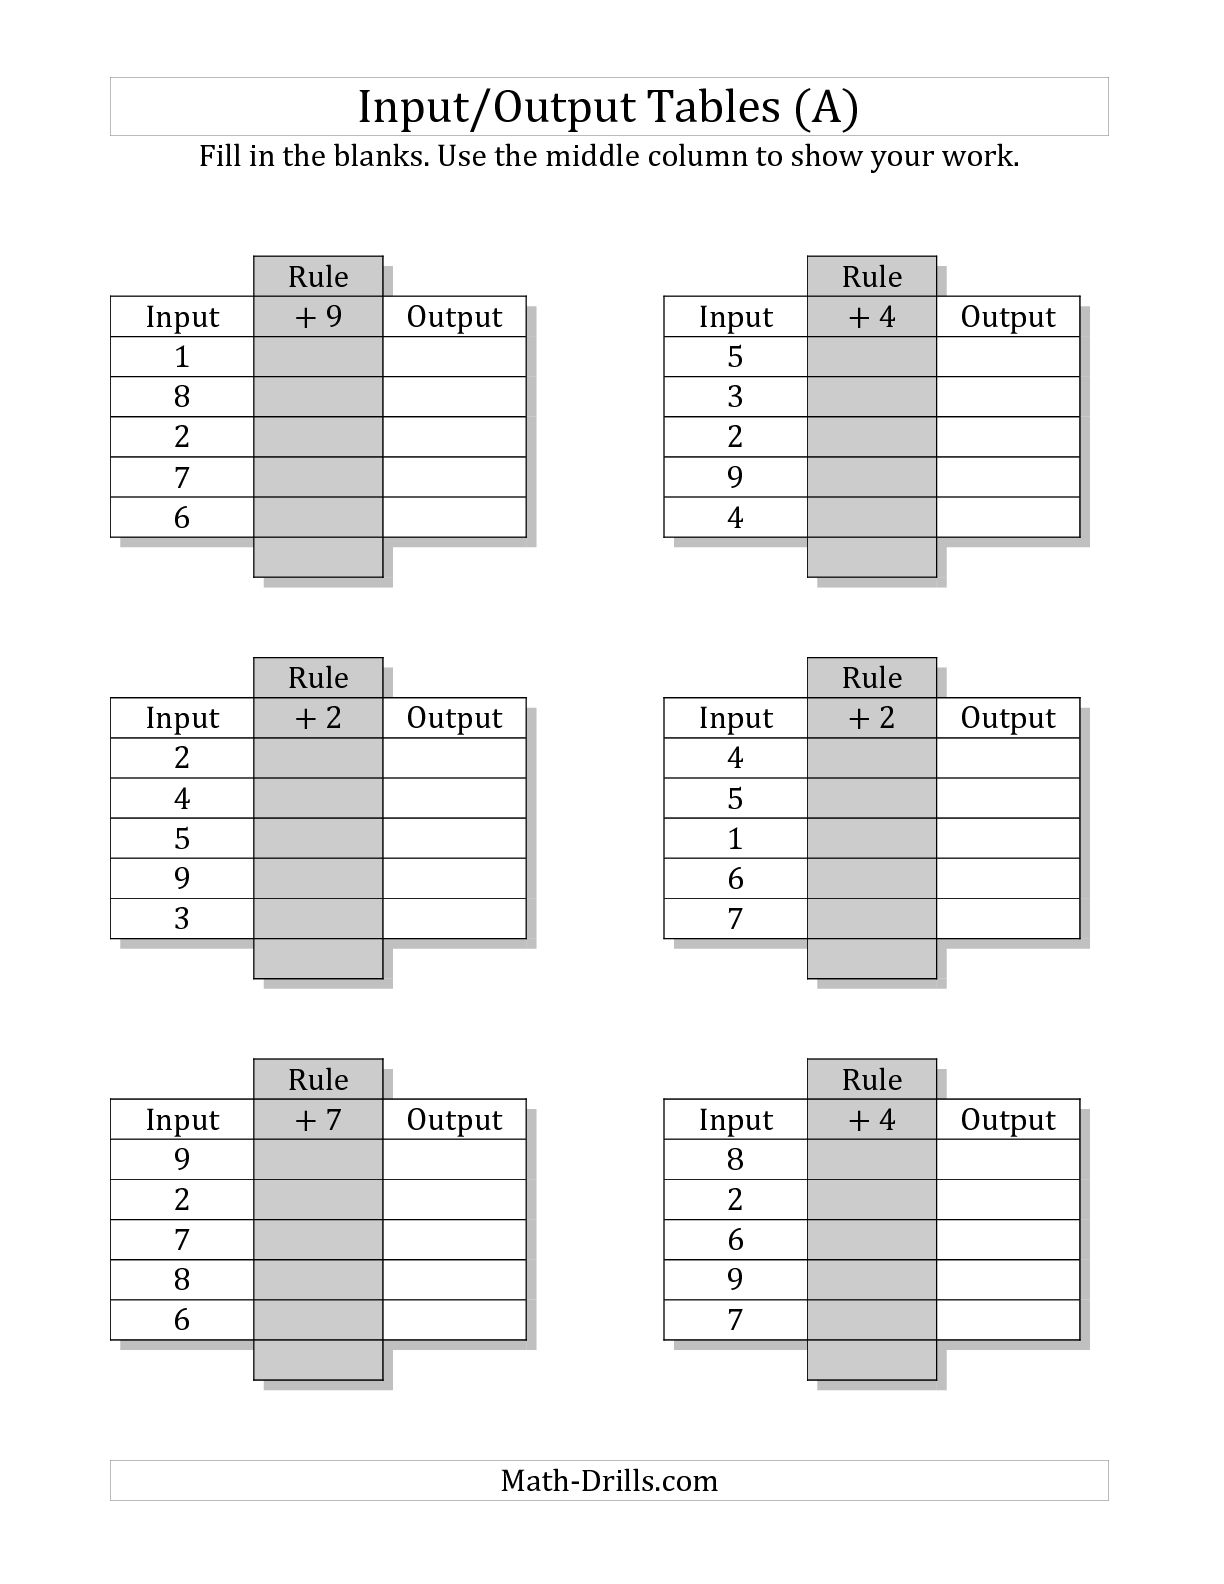 15 Best Images Of Blank Function Tables Worksheets Function Tables Worksheets Input Output